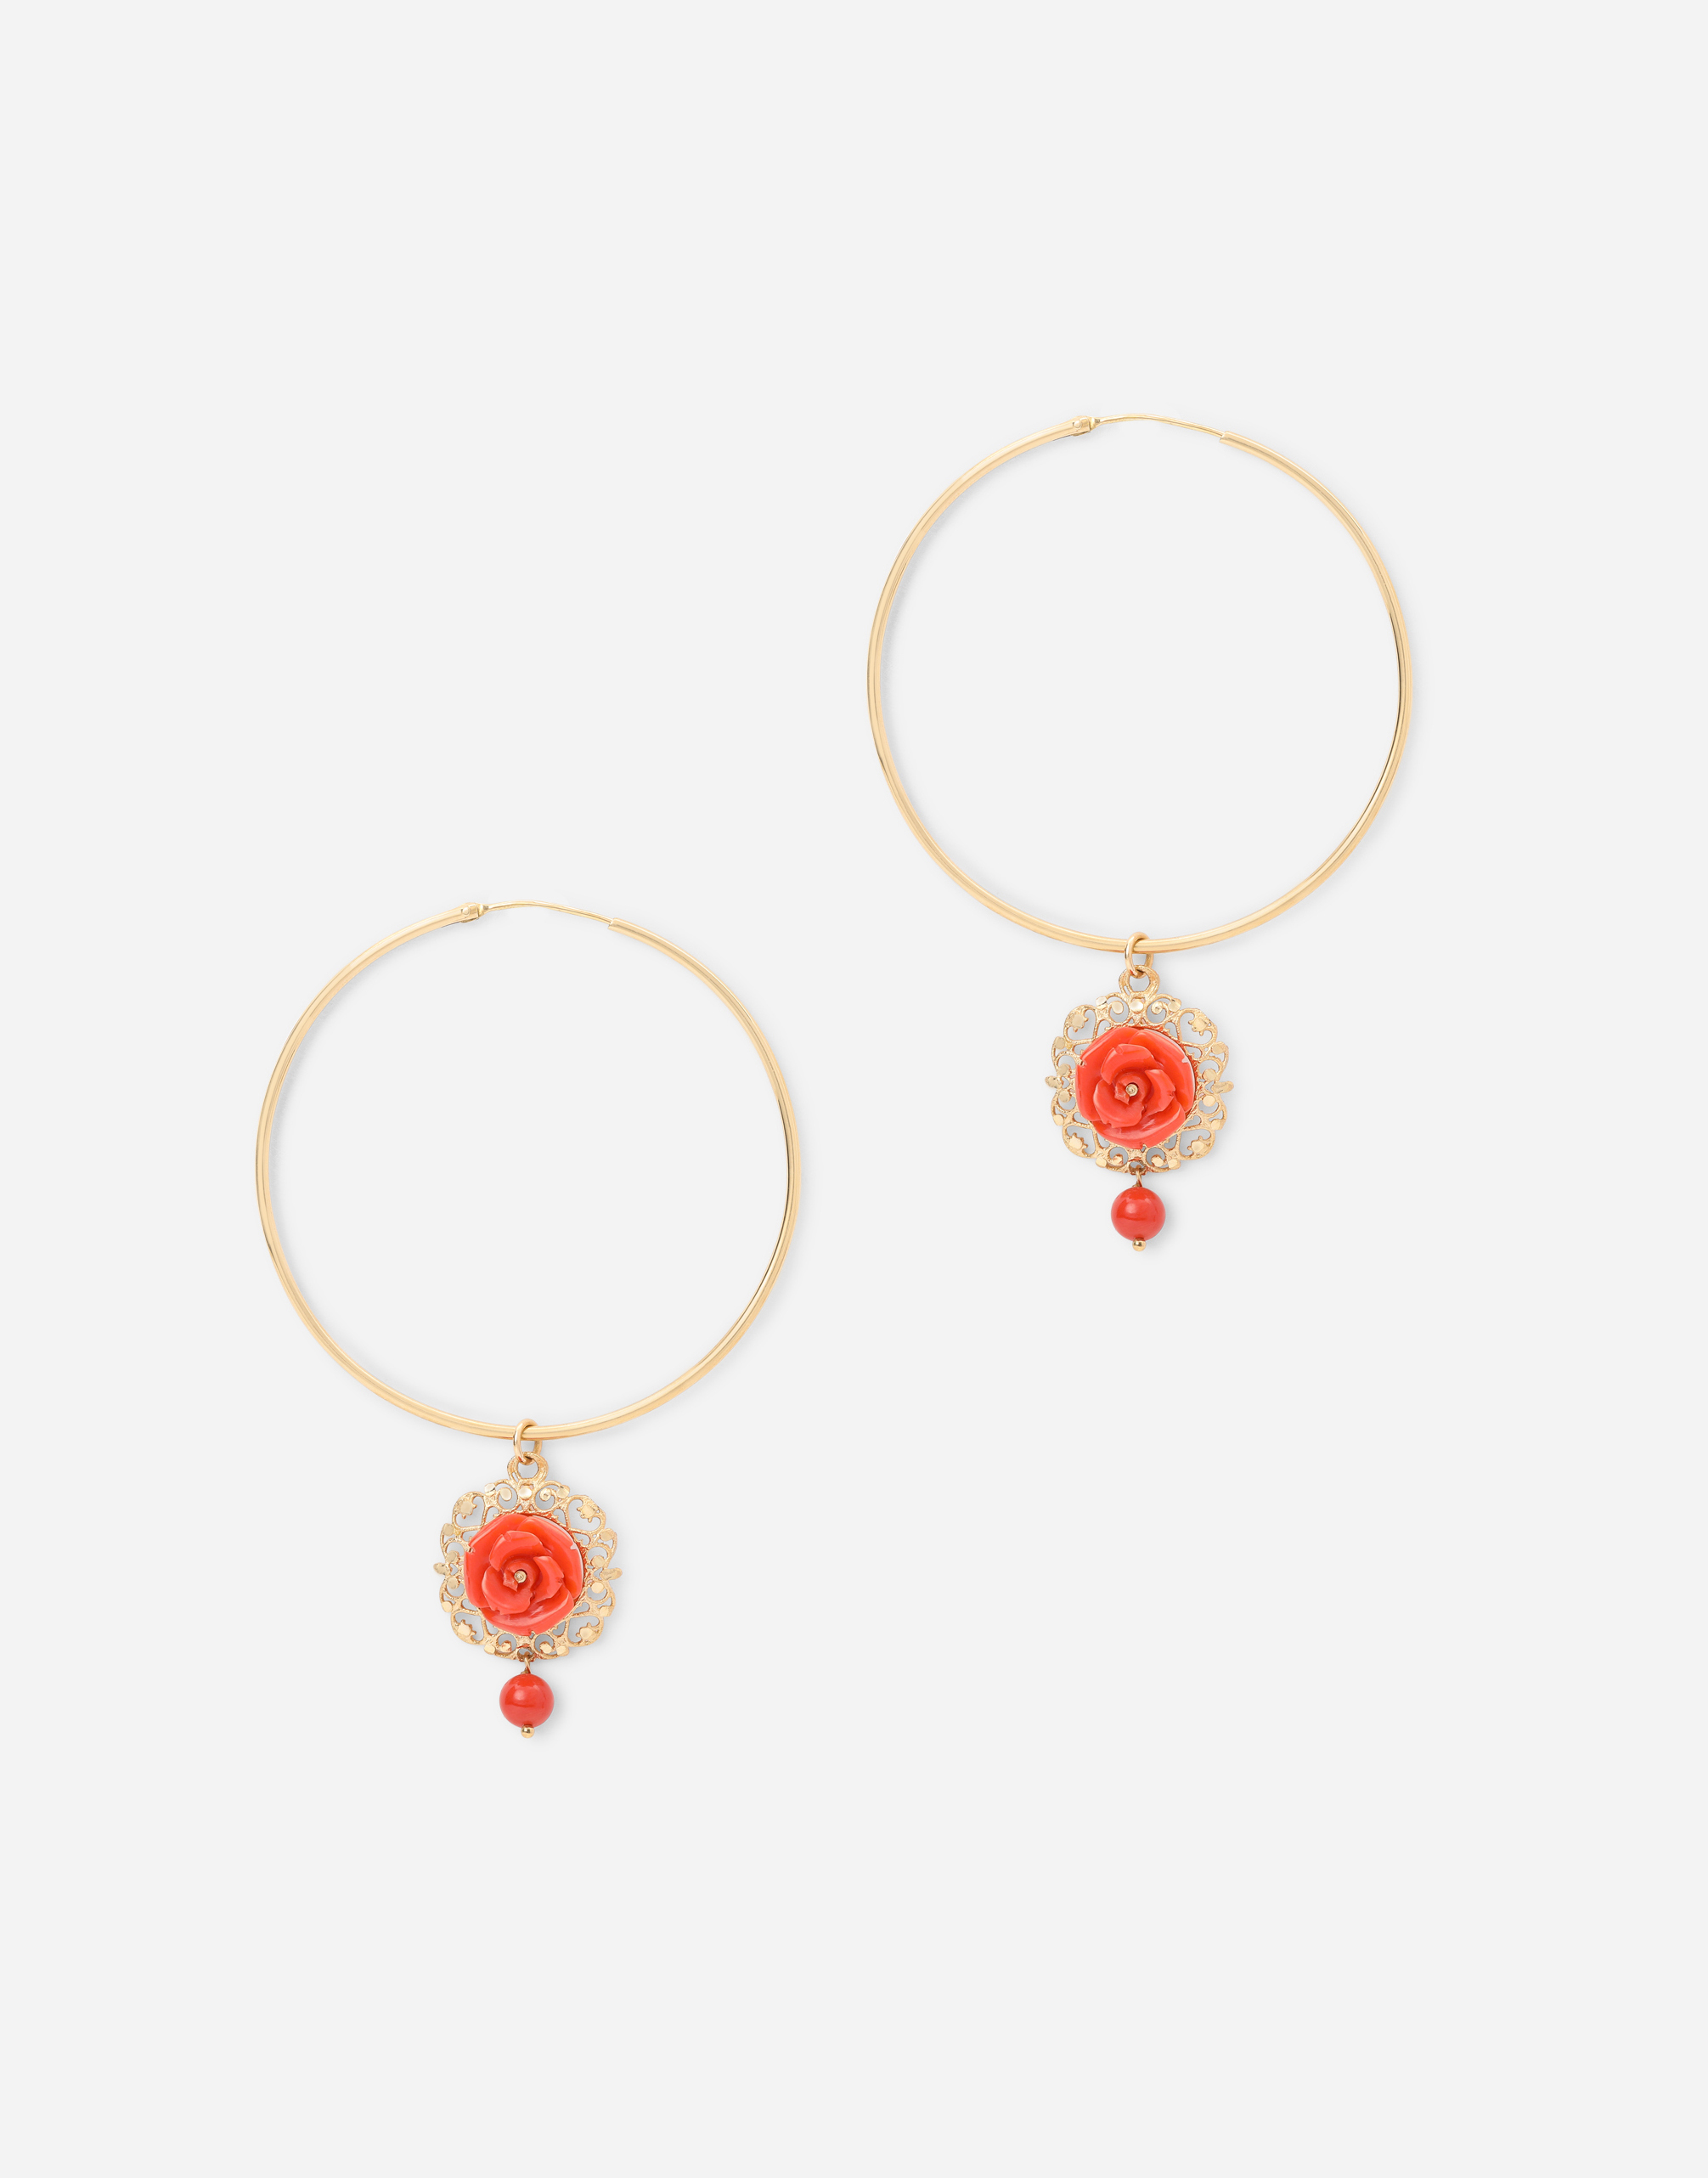 Coral loop earrings in yellow 18kt gold with coral roses in Gold